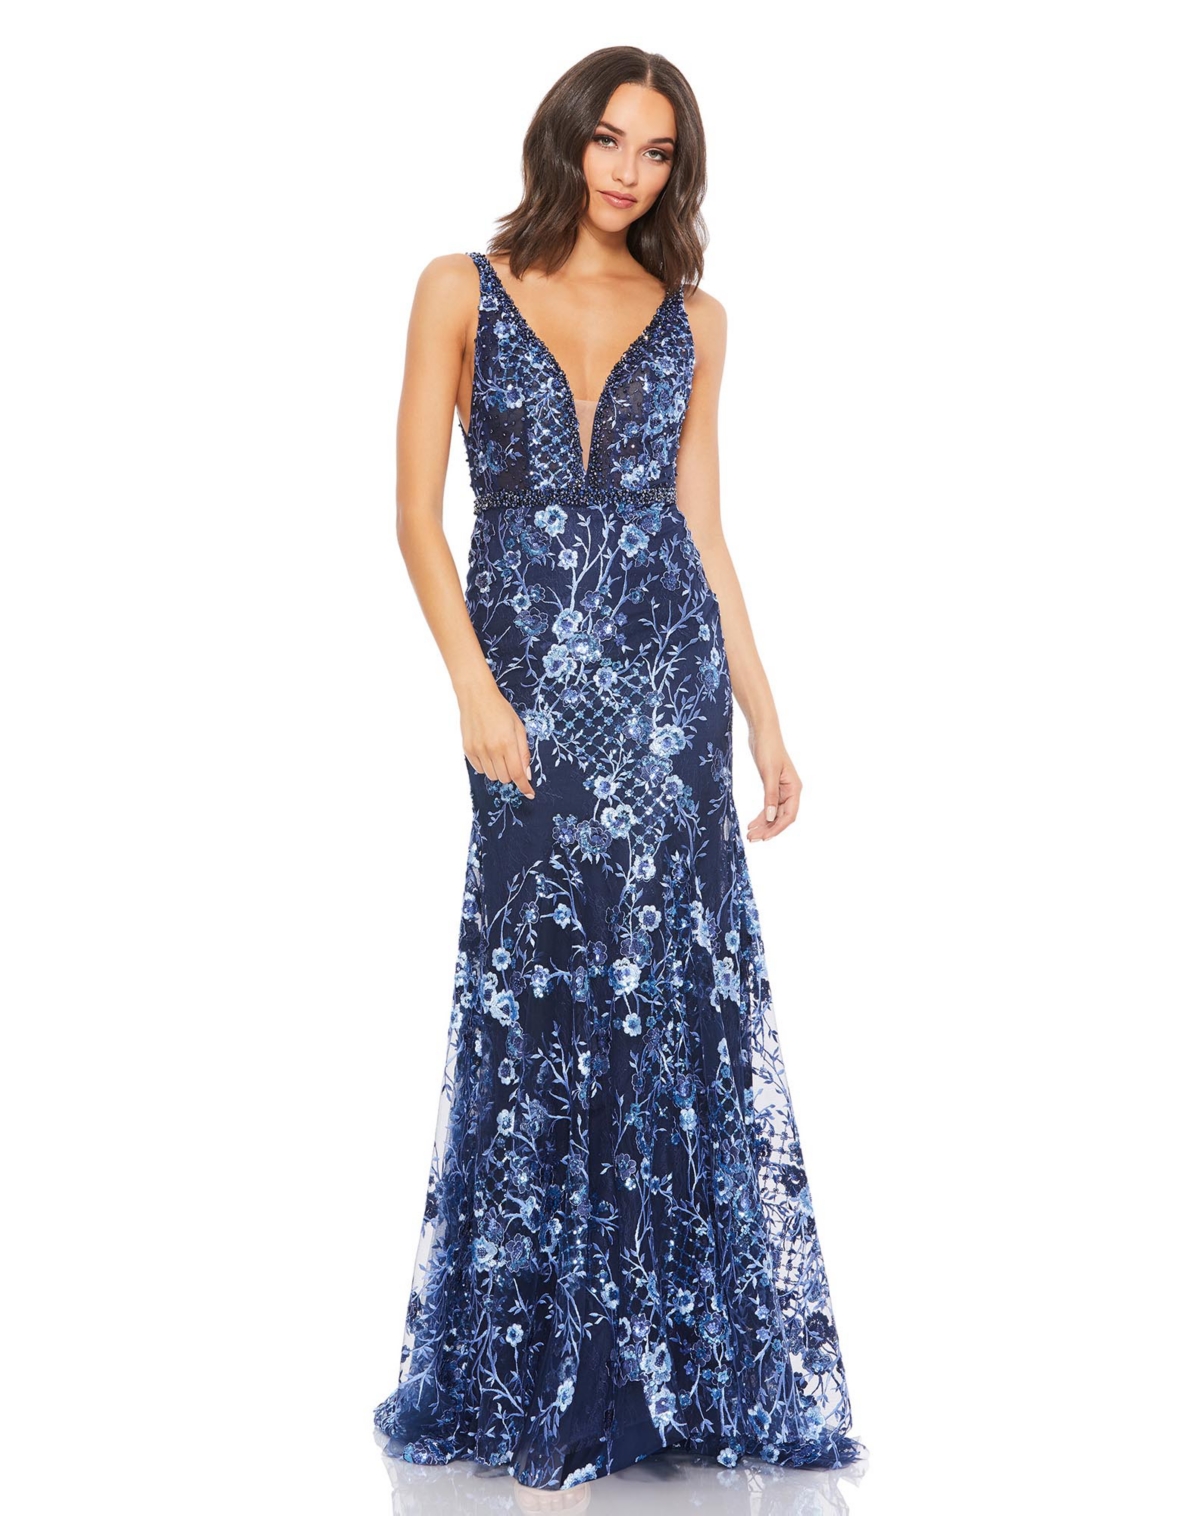 MAC DUGGAL WOMEN'S FLORAL EMBELLISHED SLEEVELESS PLUNGE NECK GOWN